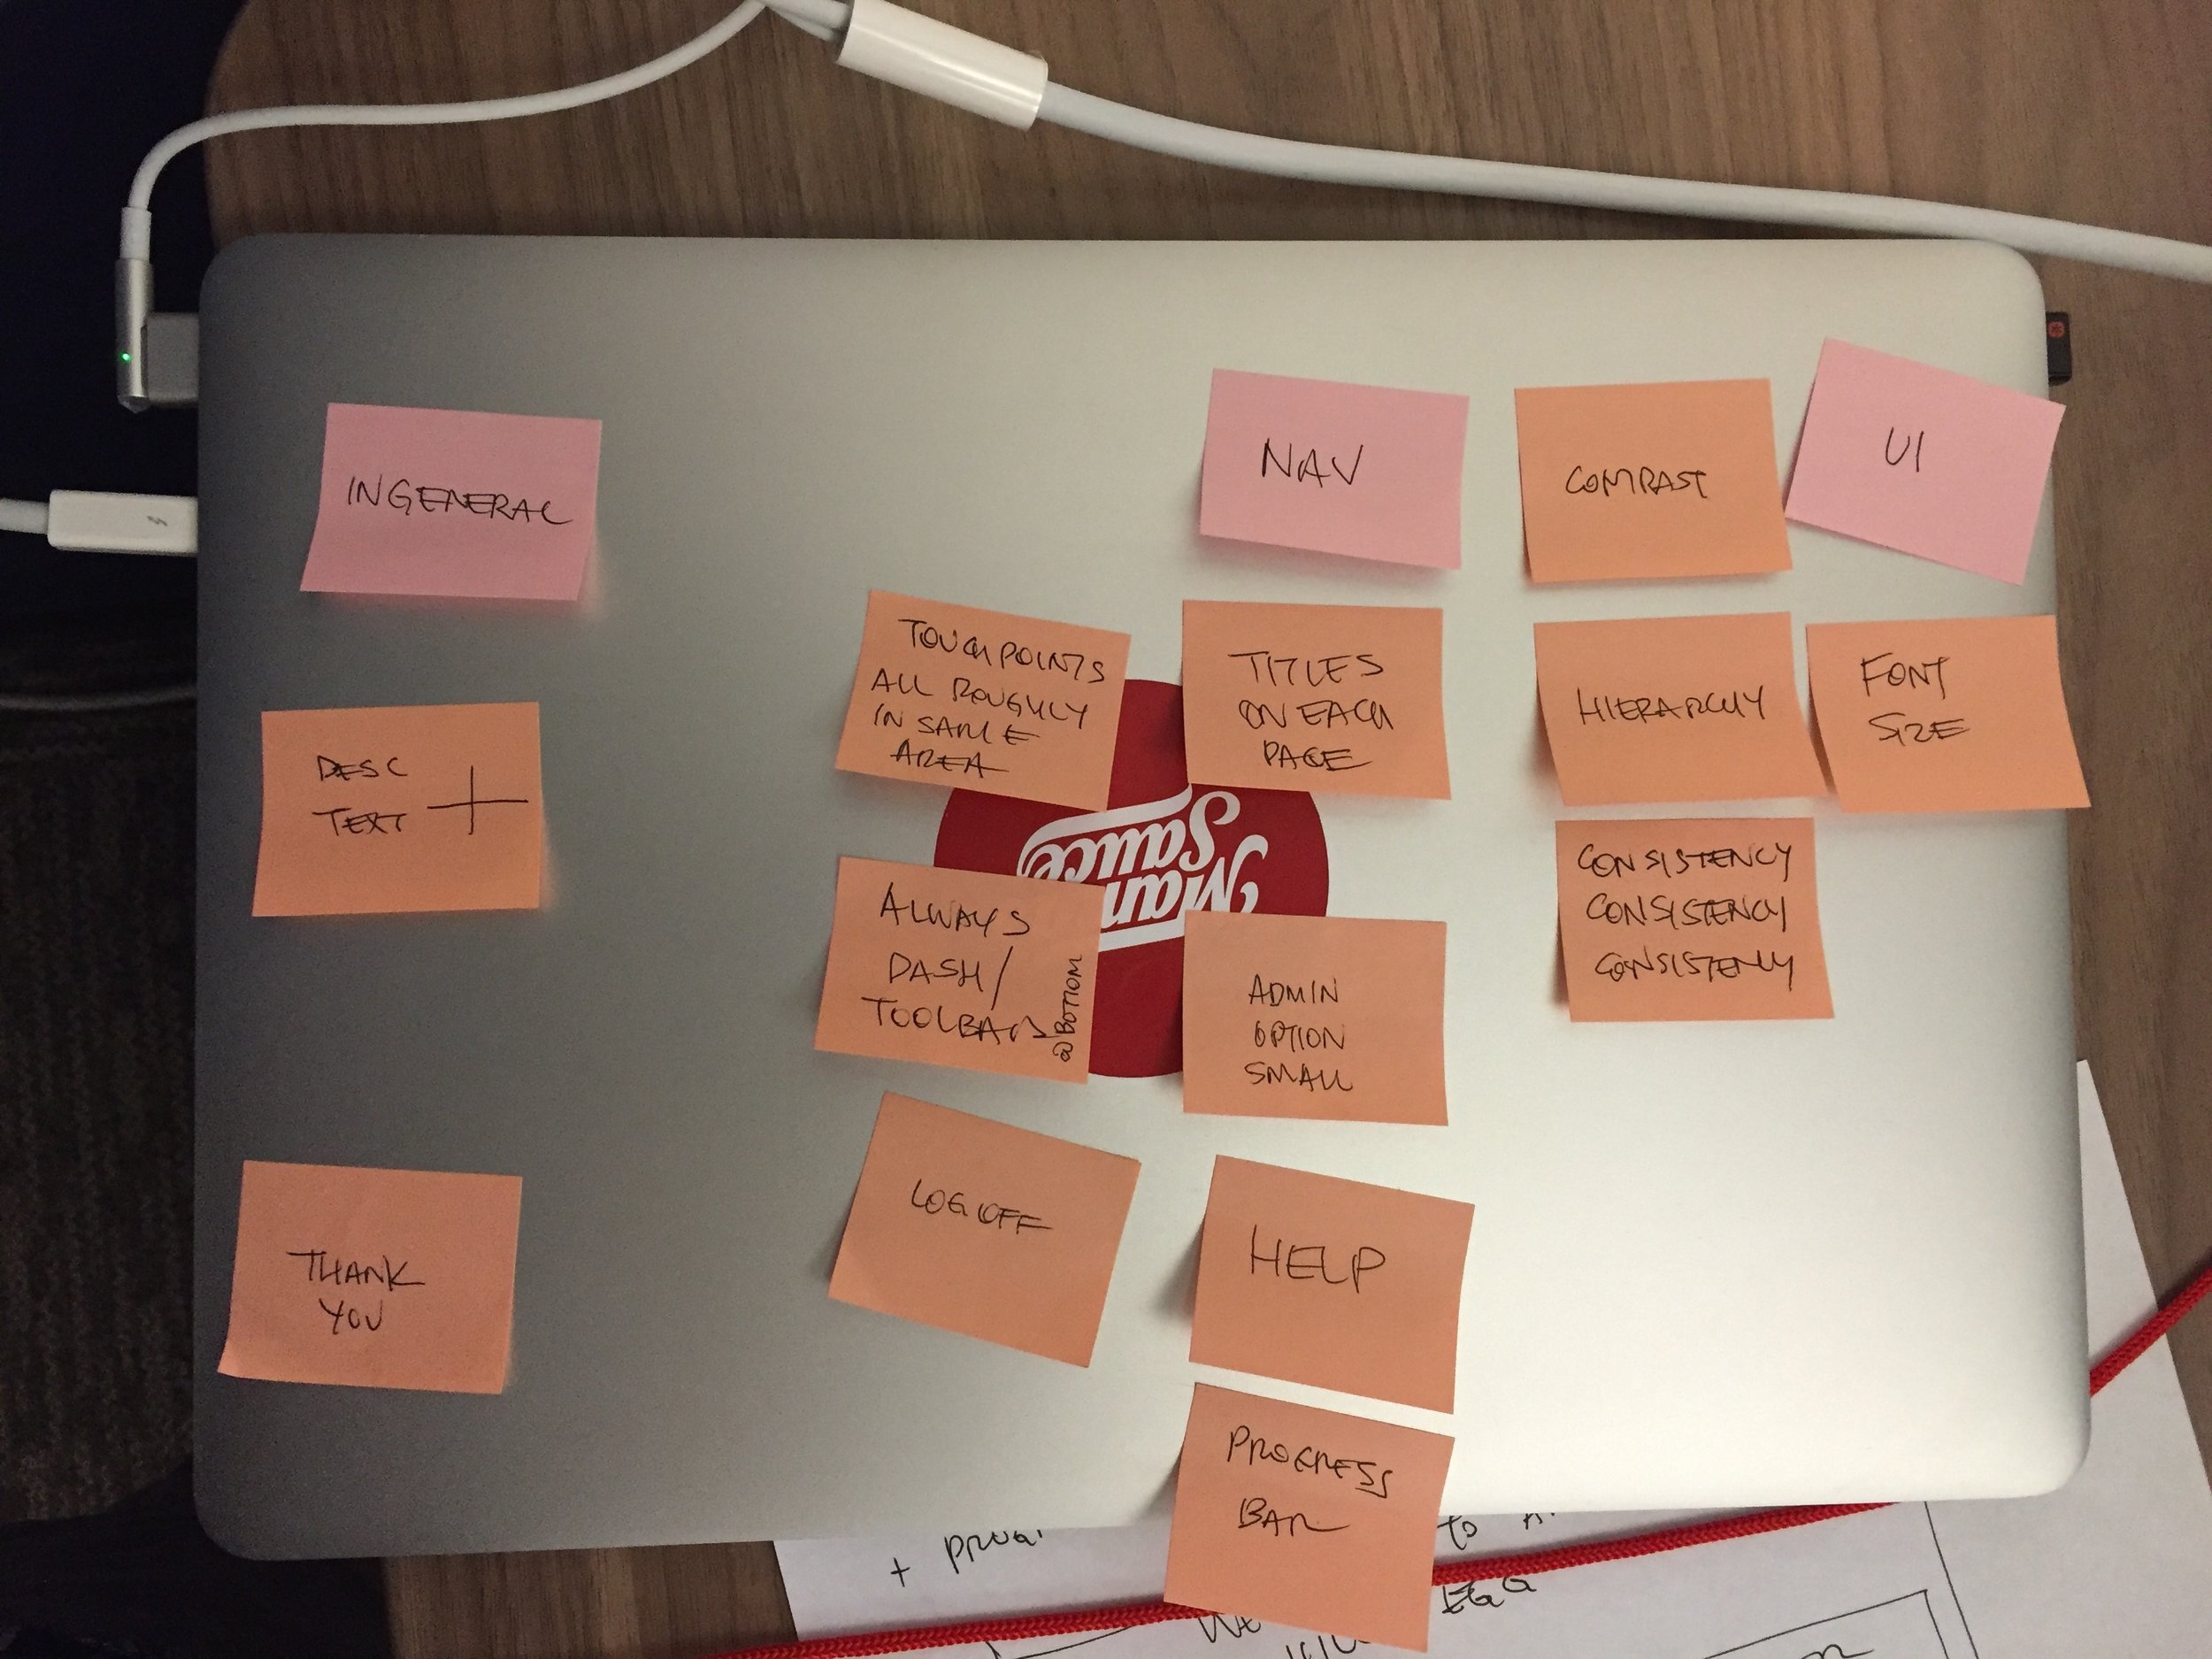 Sticky notes from open card sorting exercise